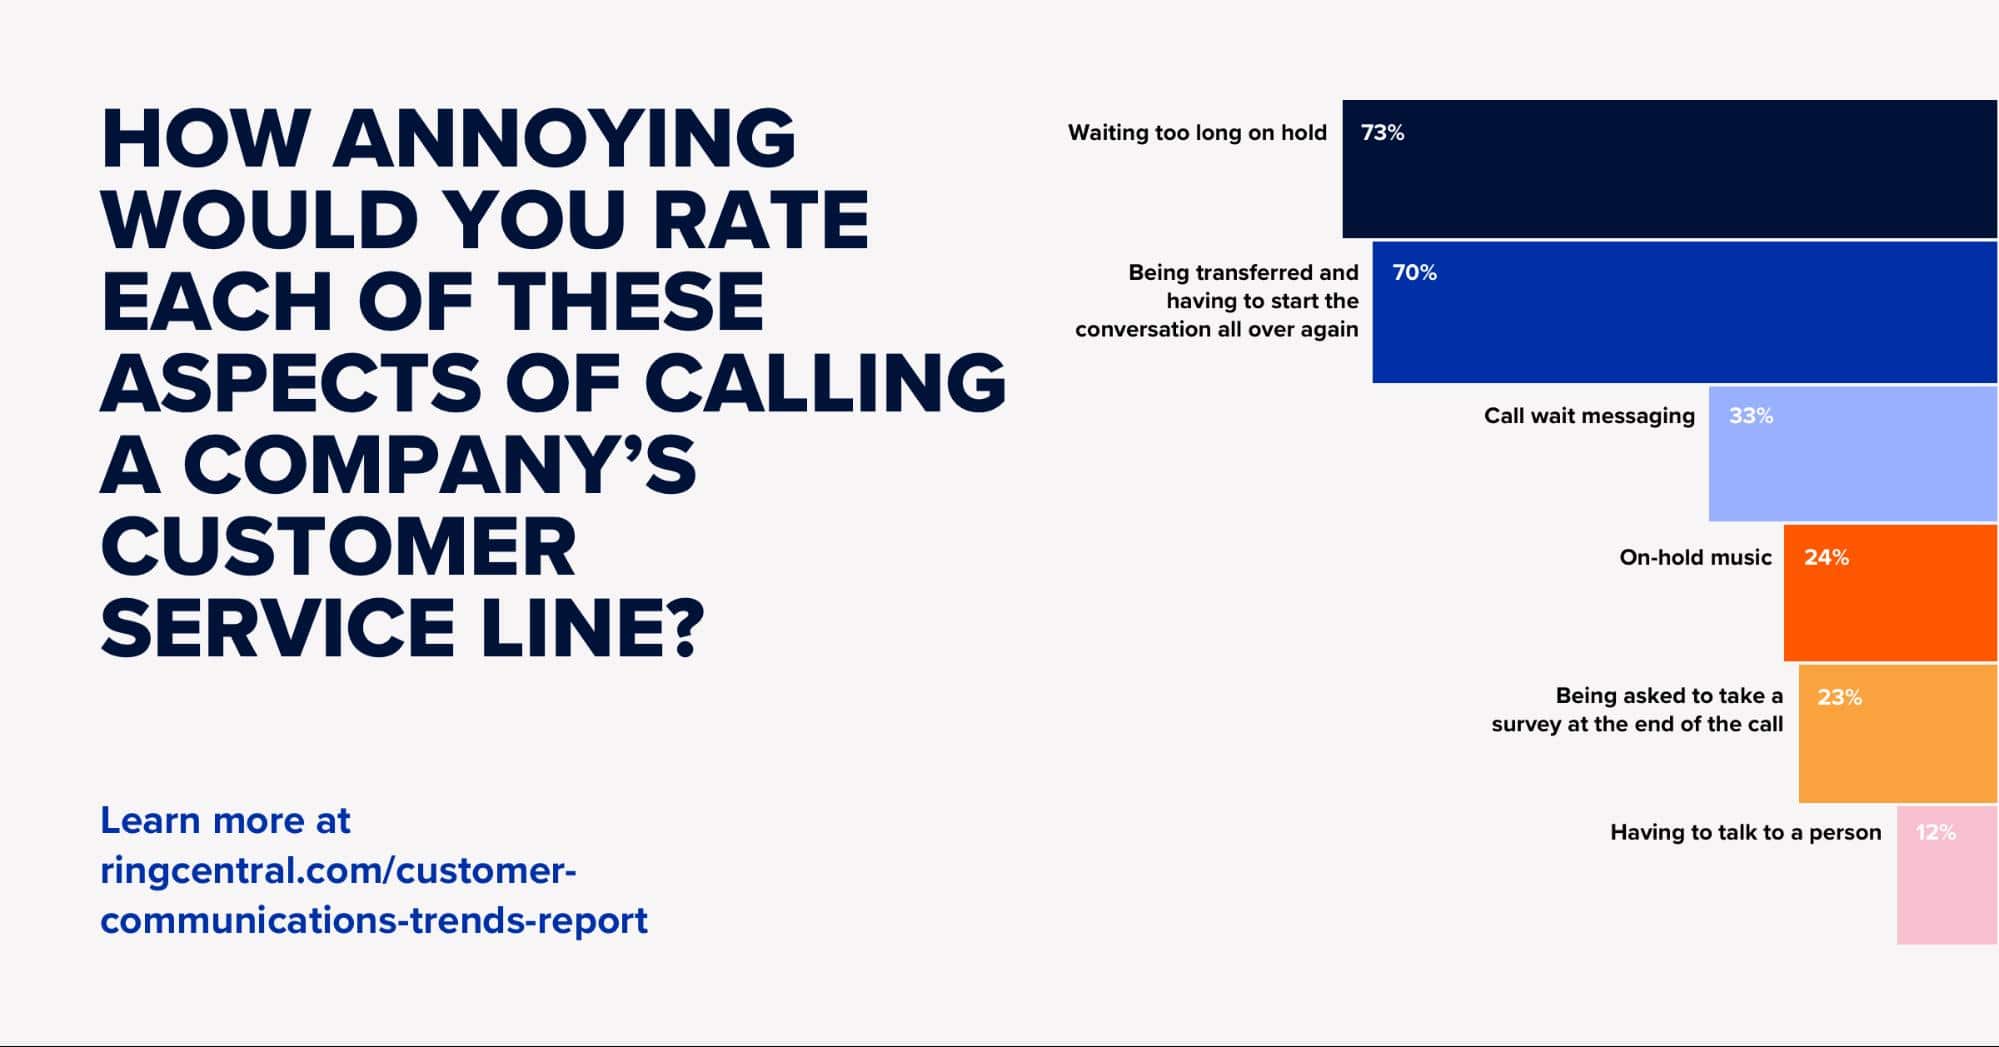 How annoying would you rate each of these aspects of calling a company's customer service line?